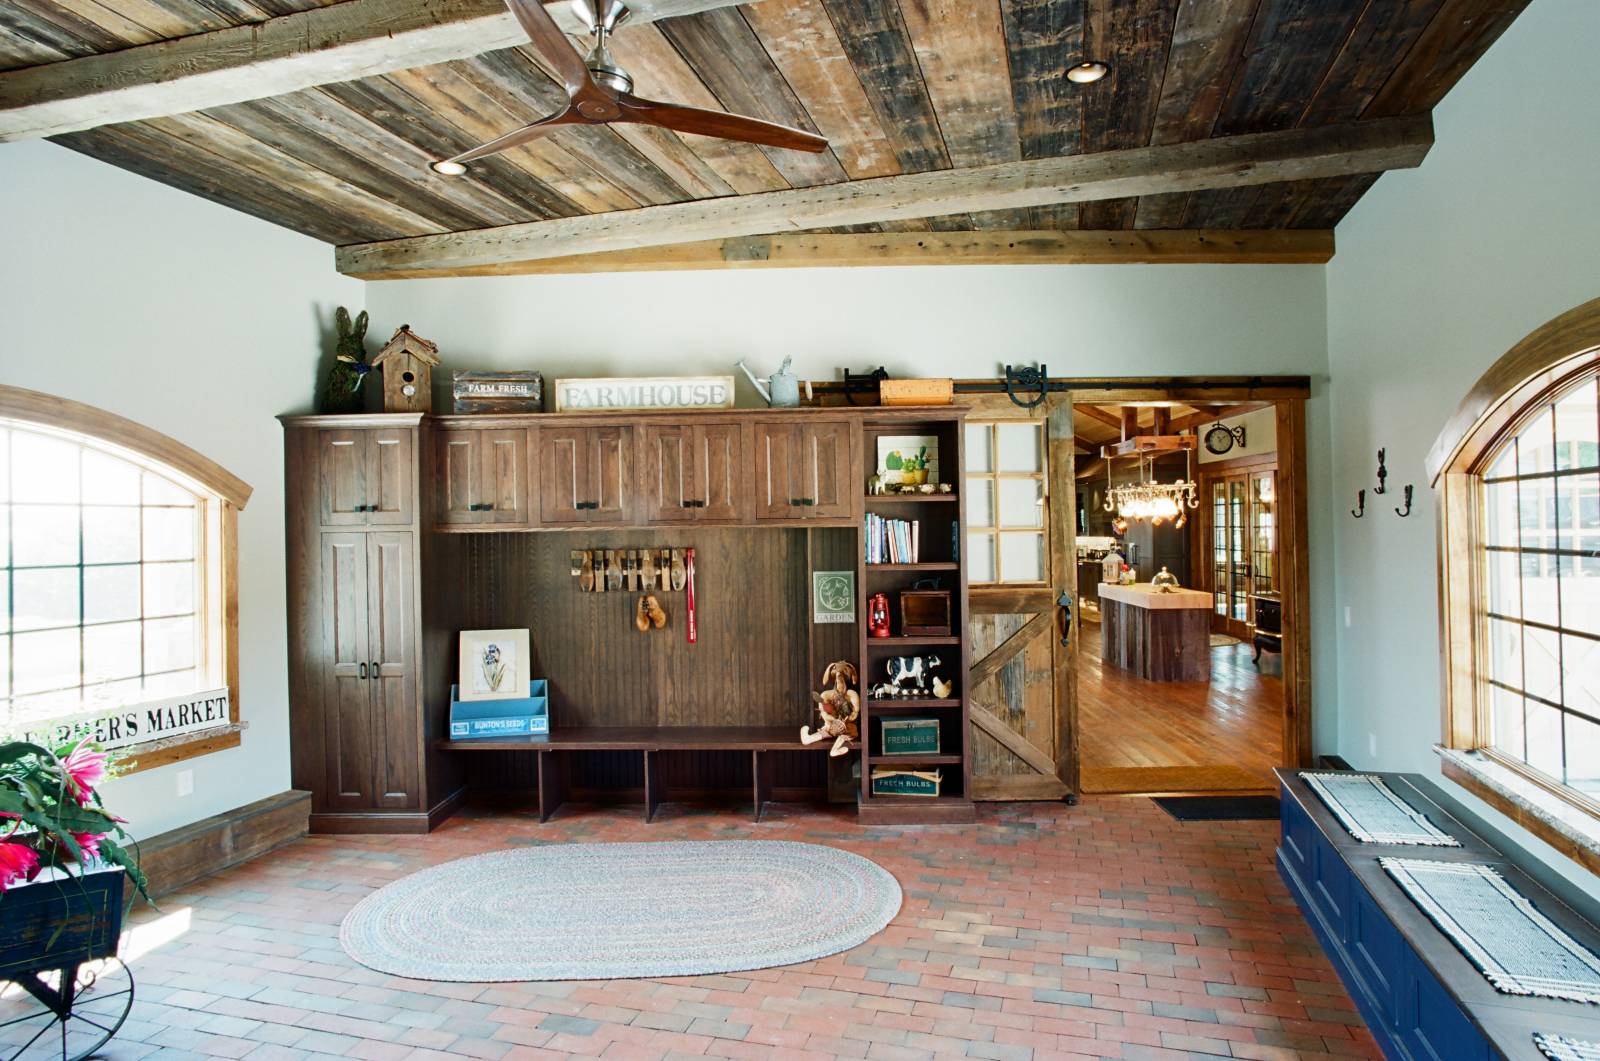 In the Entry: Reclaimed Barn Wood Ceiling • Arched Bow Top Windows • Sliding Barn Door • Brick Floor